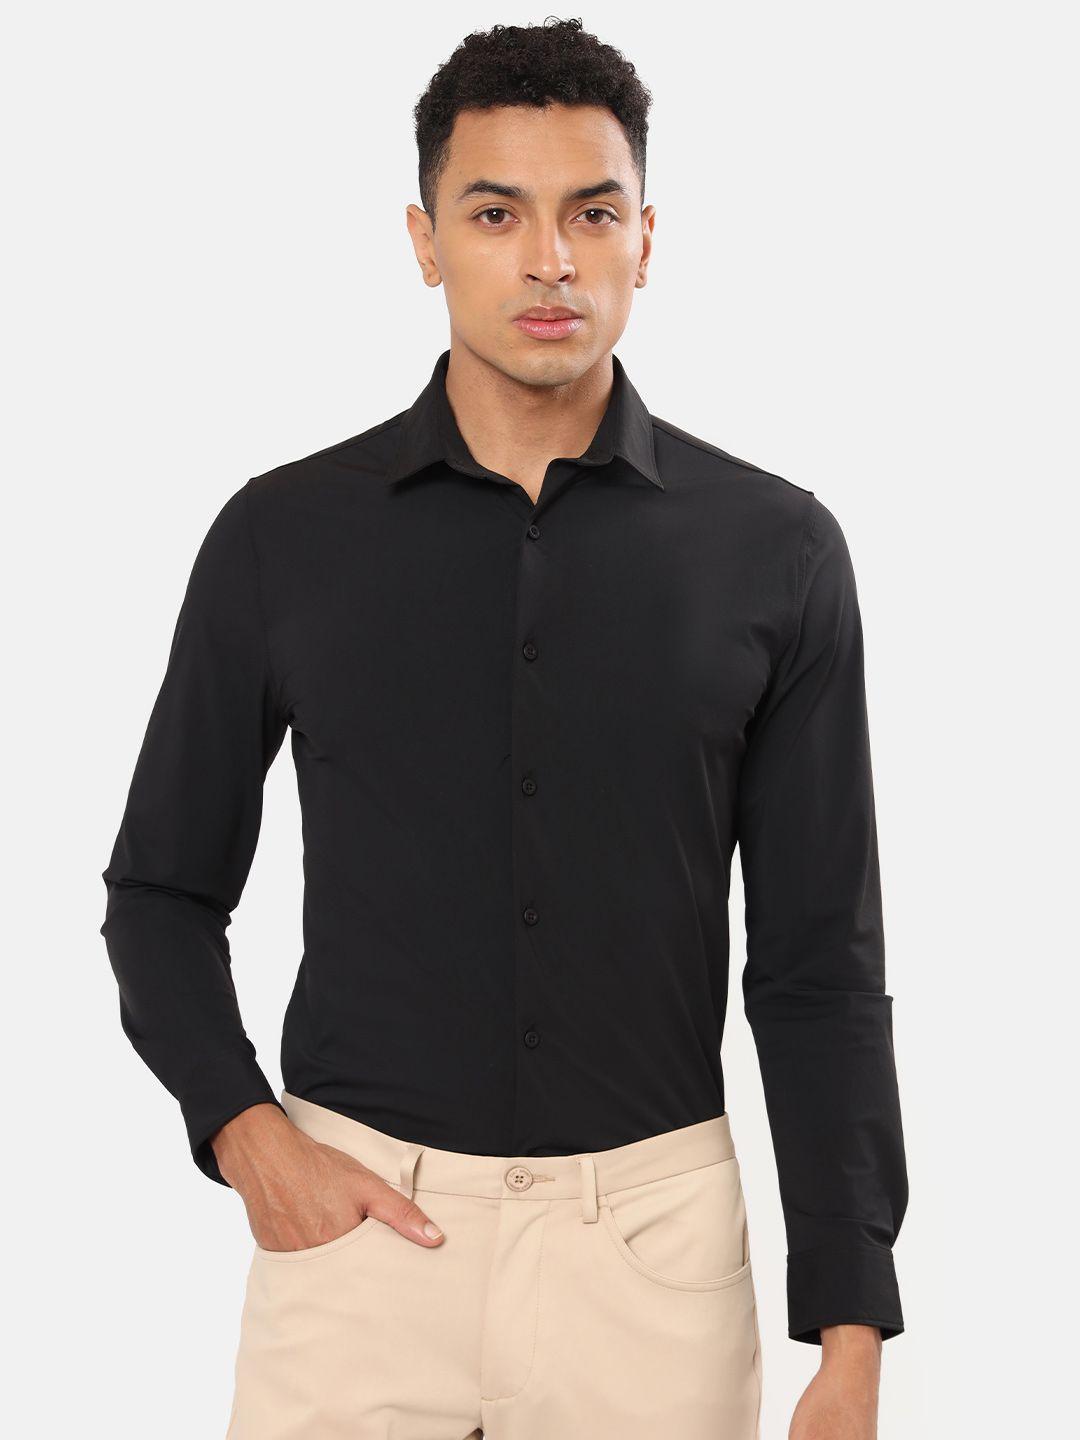 cultsport men slim-fit 4-way stretch move with ease shirt